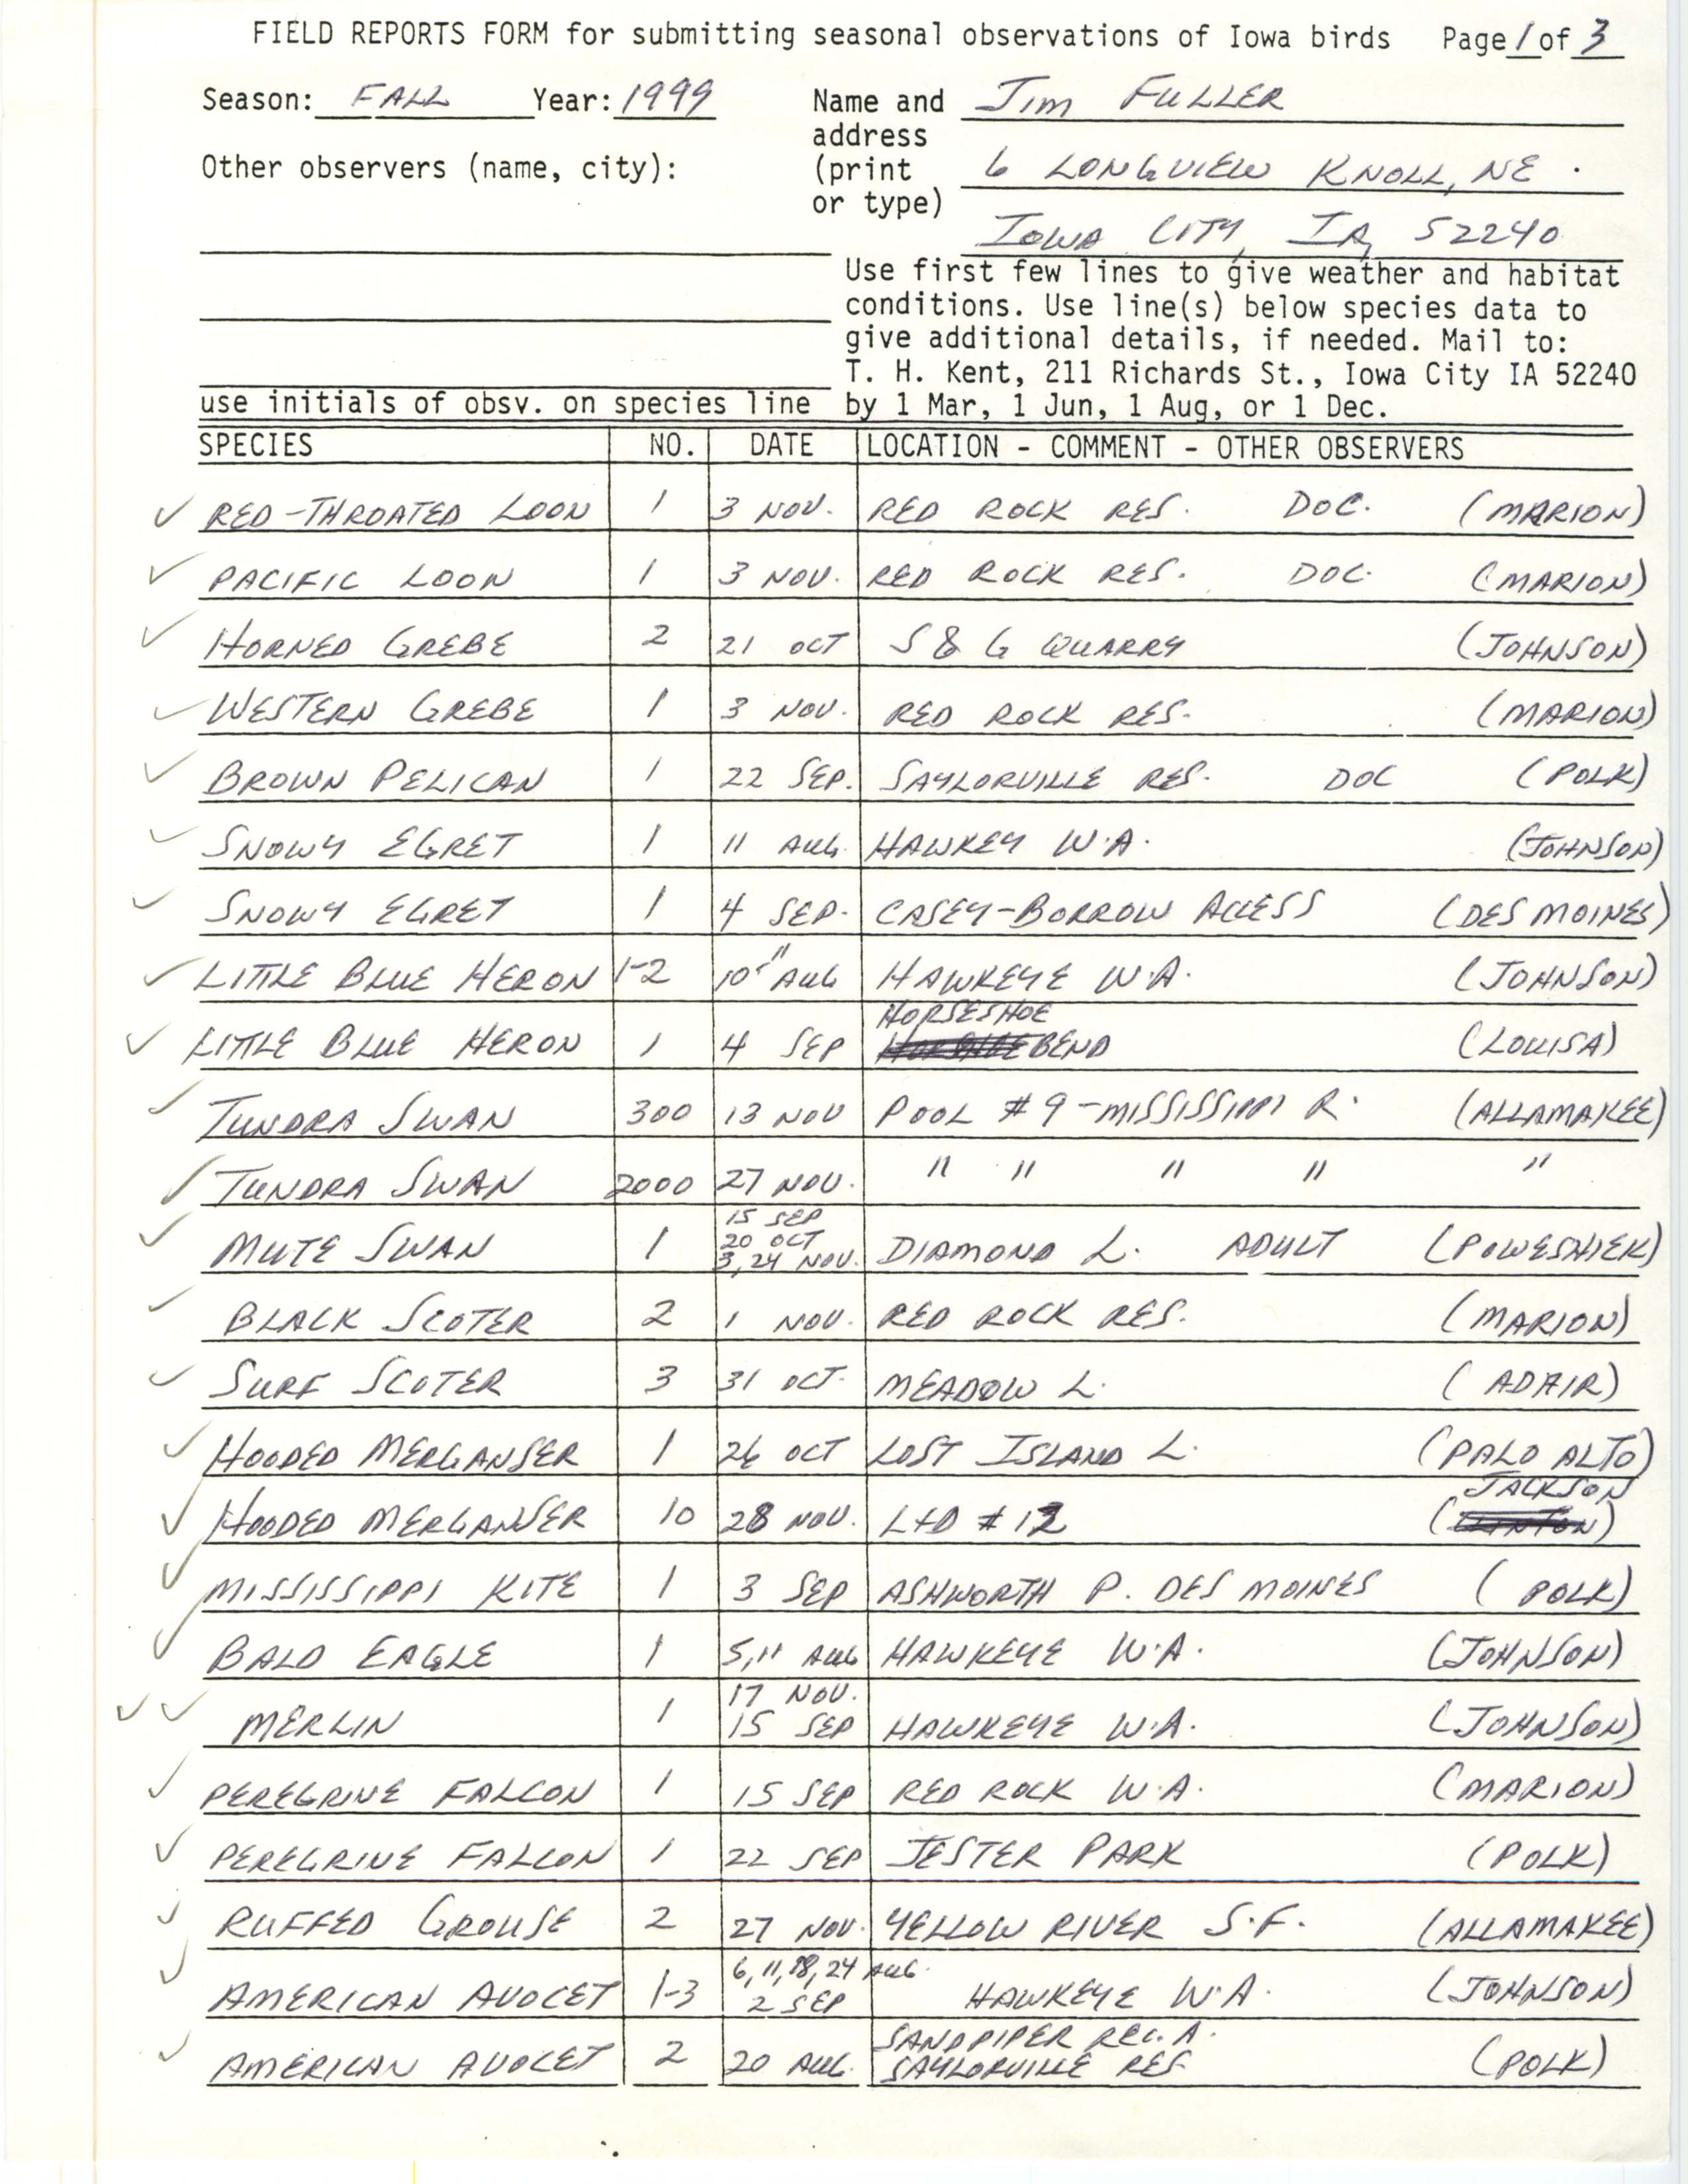 Field reports form for submitting seasonal observations of Iowa birds, fall 1999, Jim Fuller